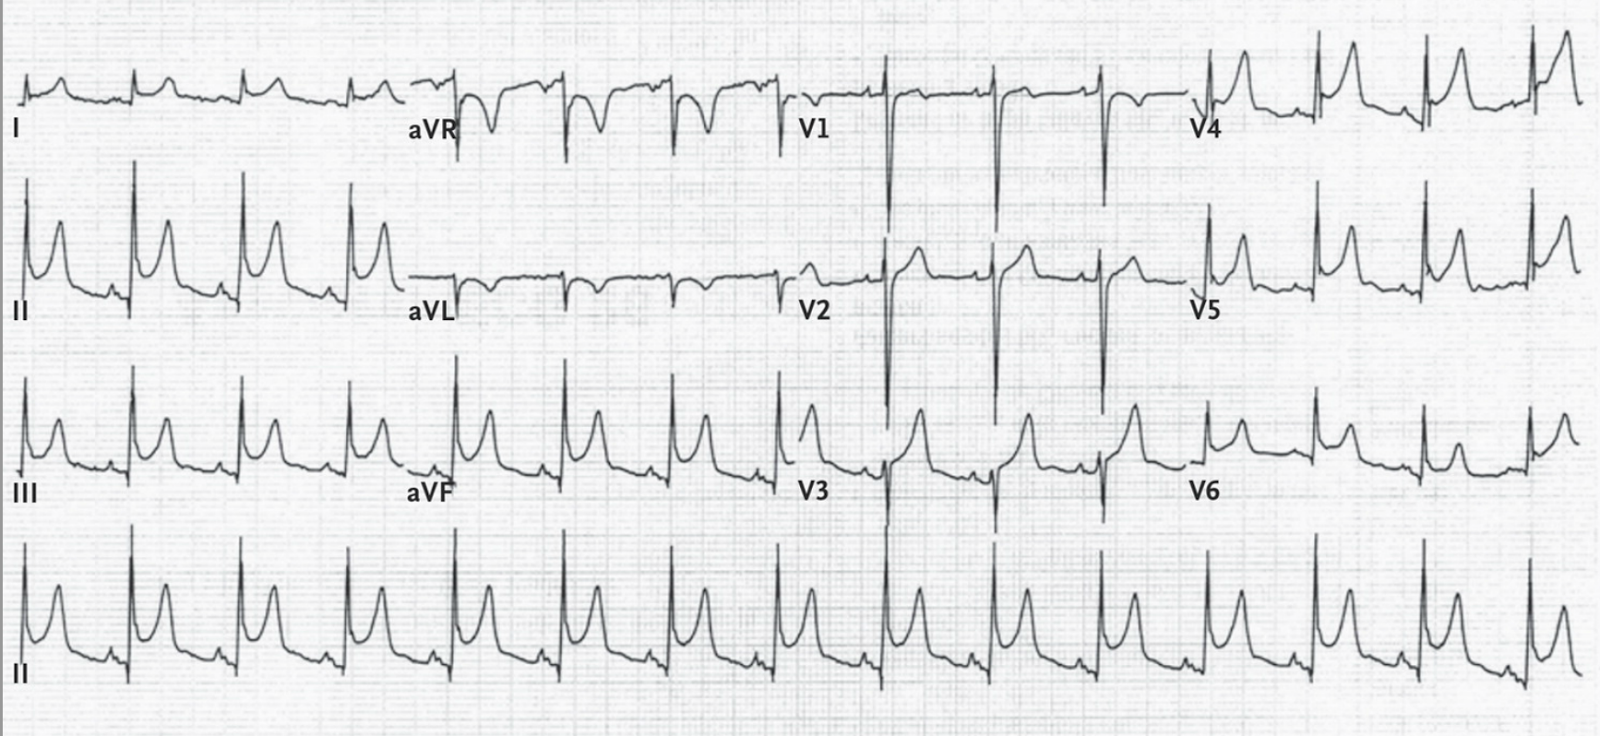 Dr Smith S Ecg Blog Why Is There St Depression In Avl In This Case Of Pericarditis